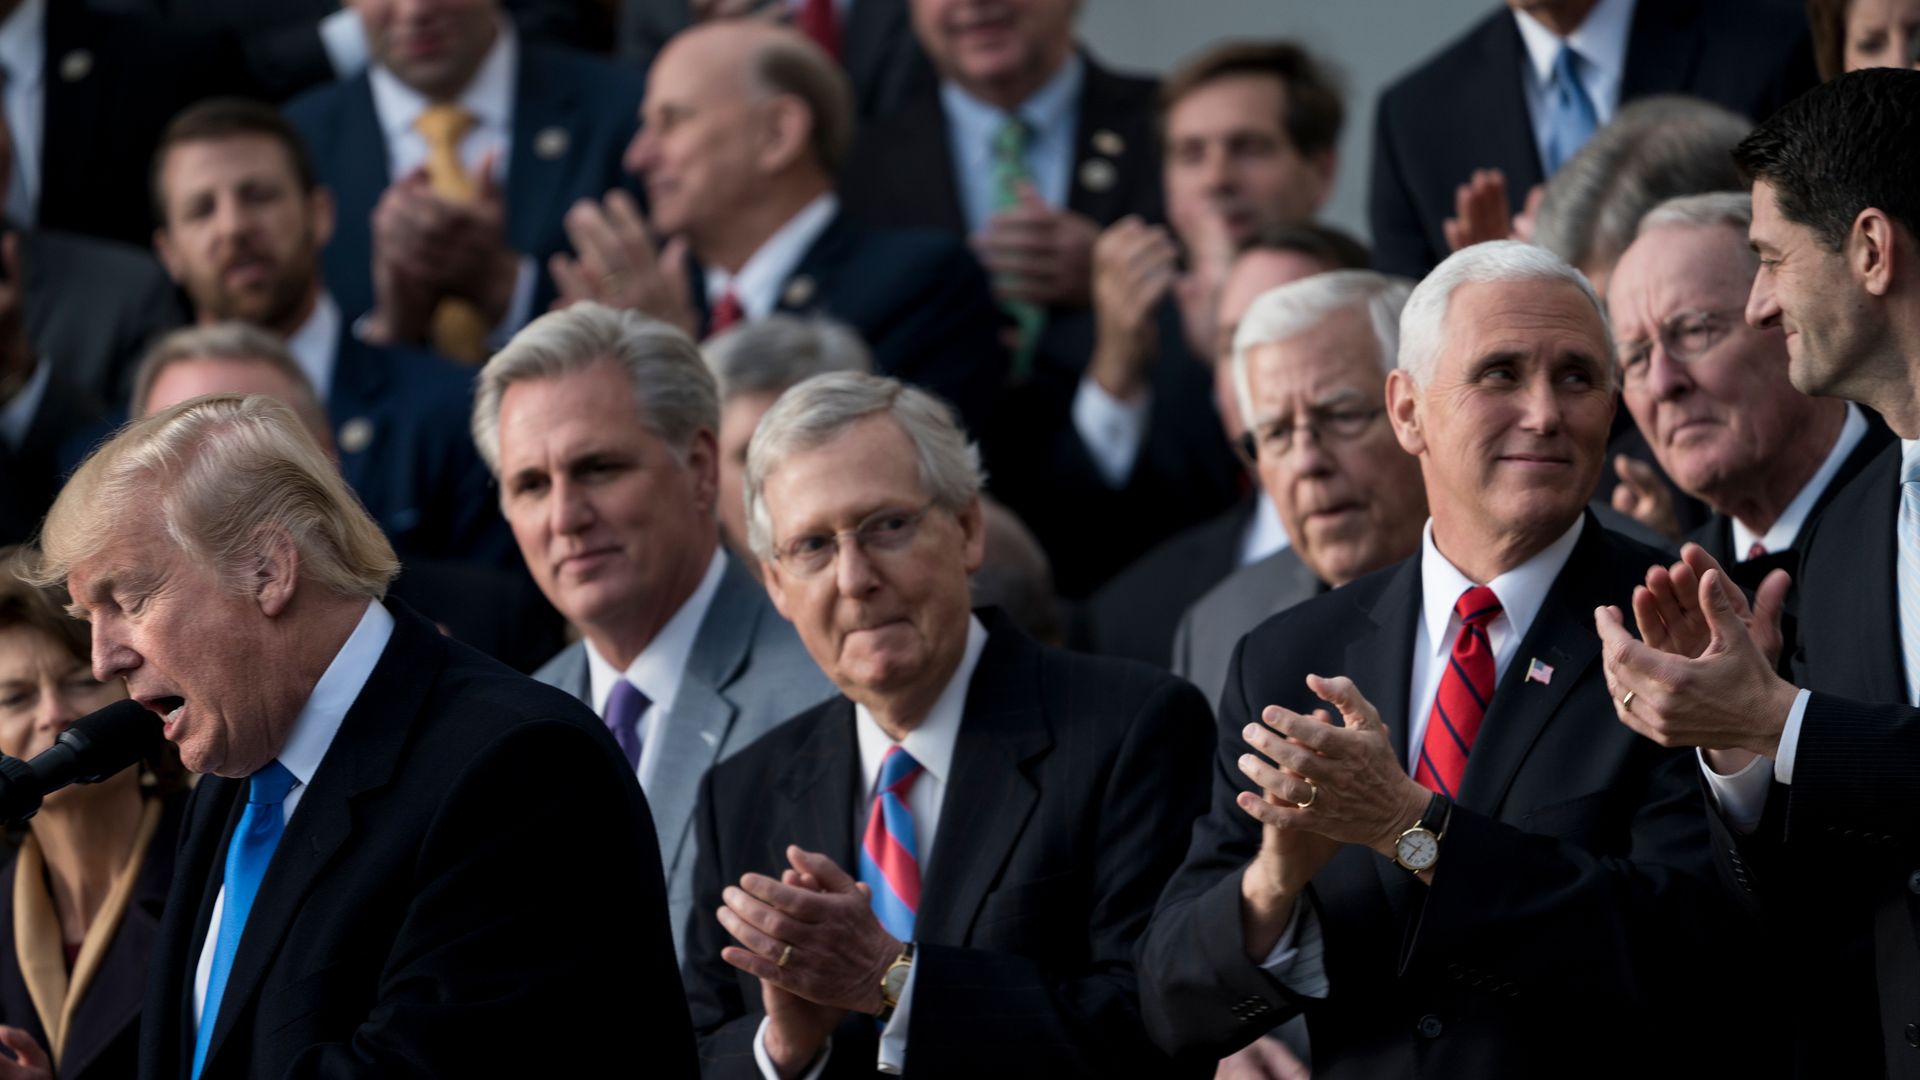 Republican male leaders clapping after passing tax cuts